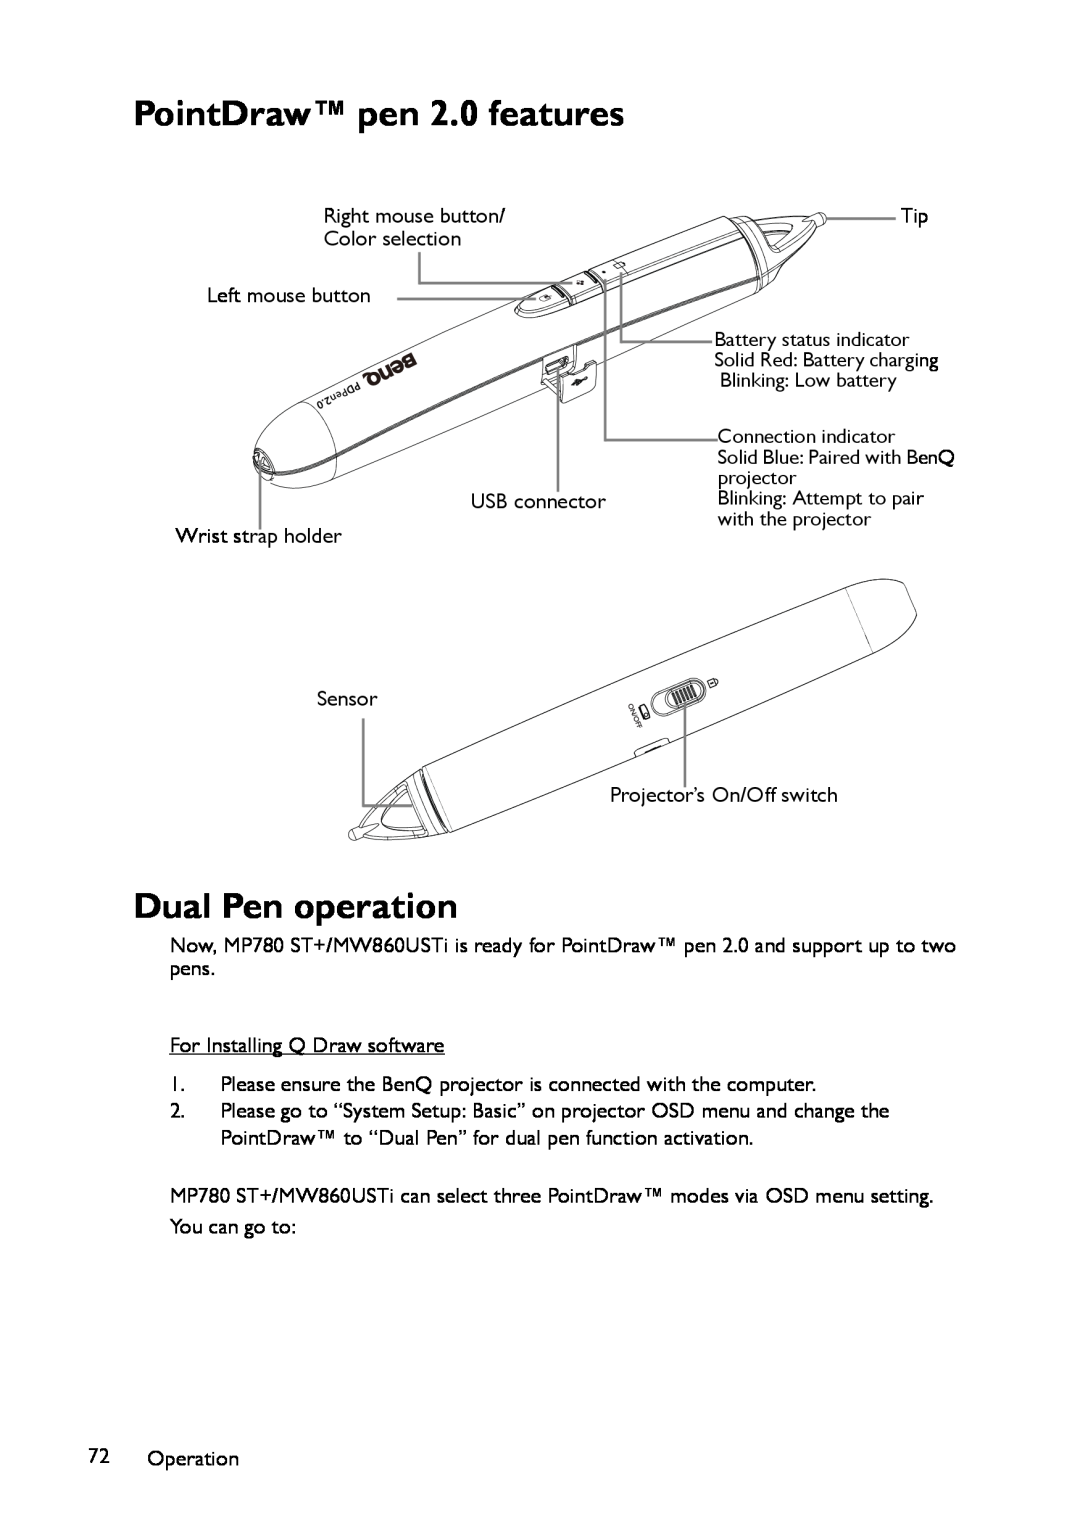 BenQ MP780 ST+, MW860USTi user manual PointDraw pen 2.0 features, Dual Pen operation 